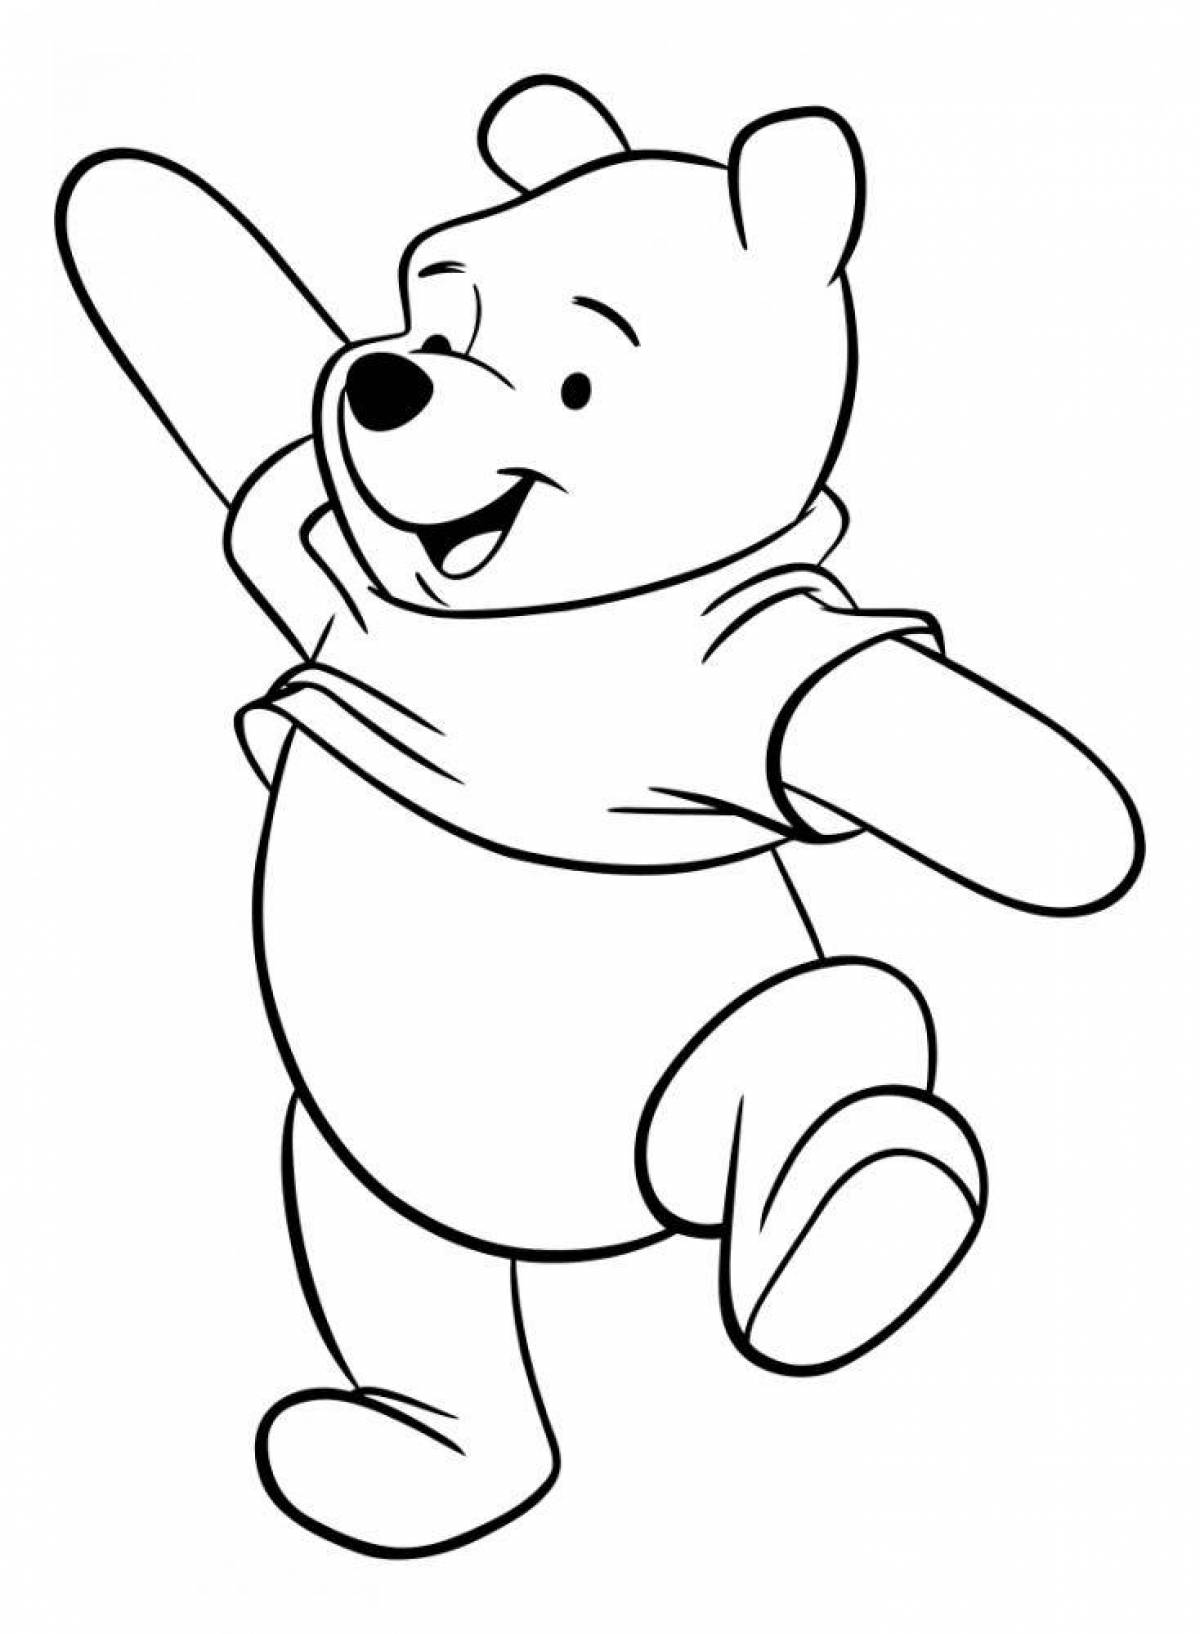 Exciting cartoon character coloring page